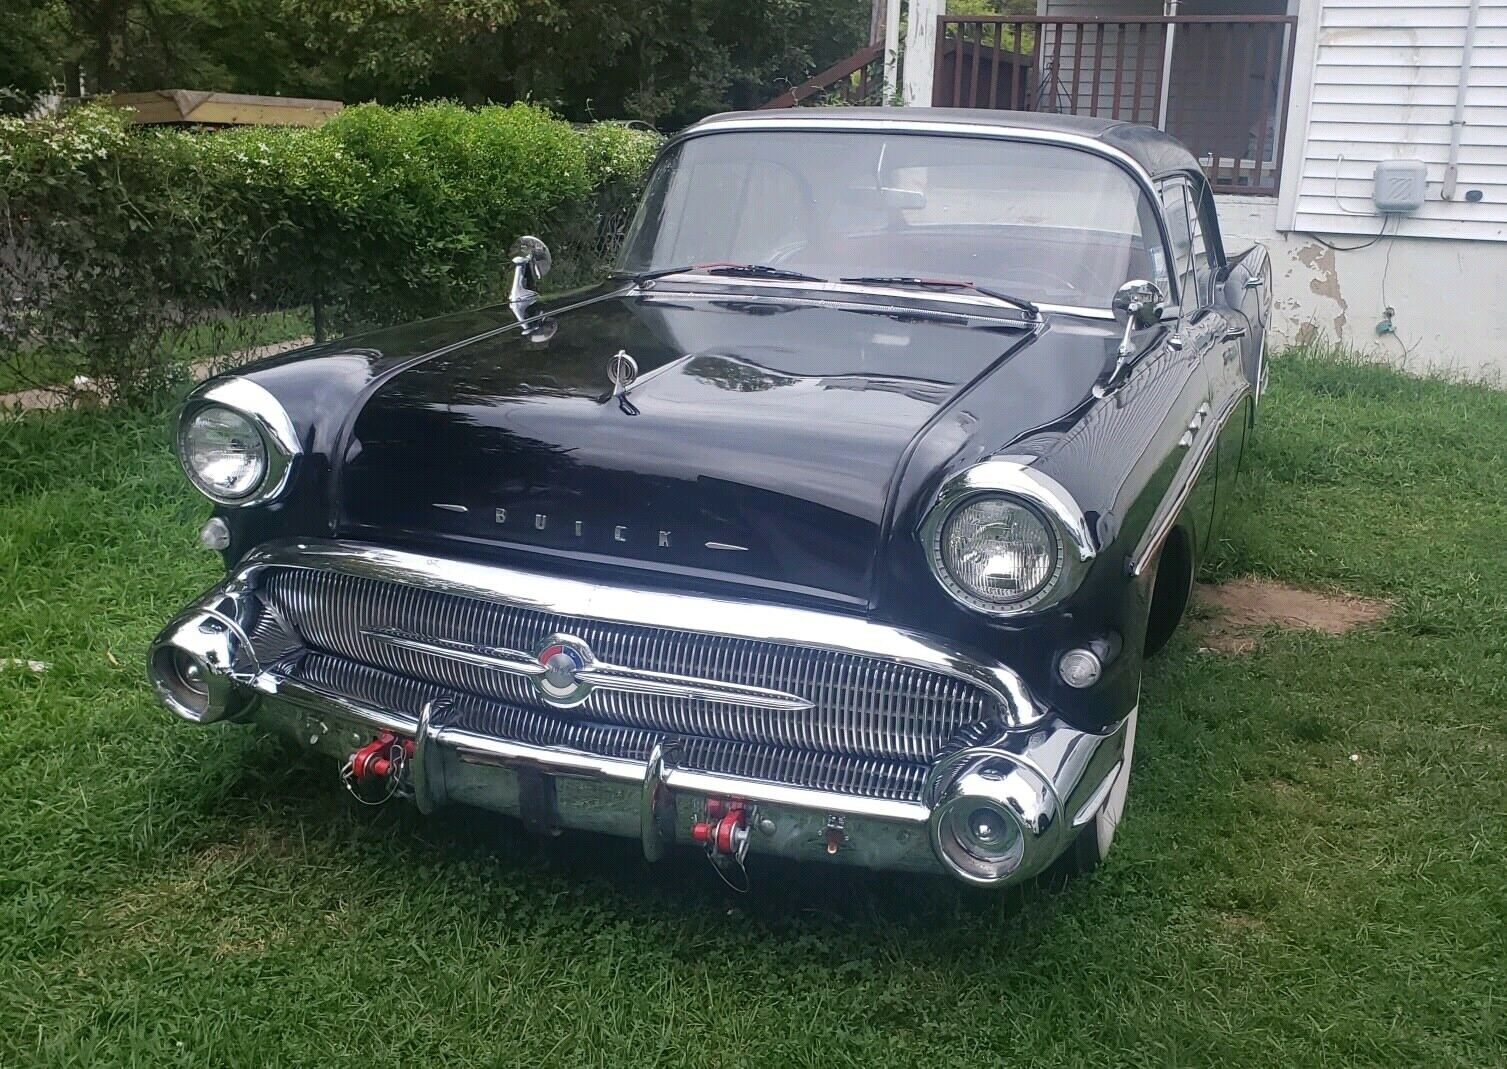 1957 Buick Special  1957 Buick Special Sedan Black Rwd Automatic